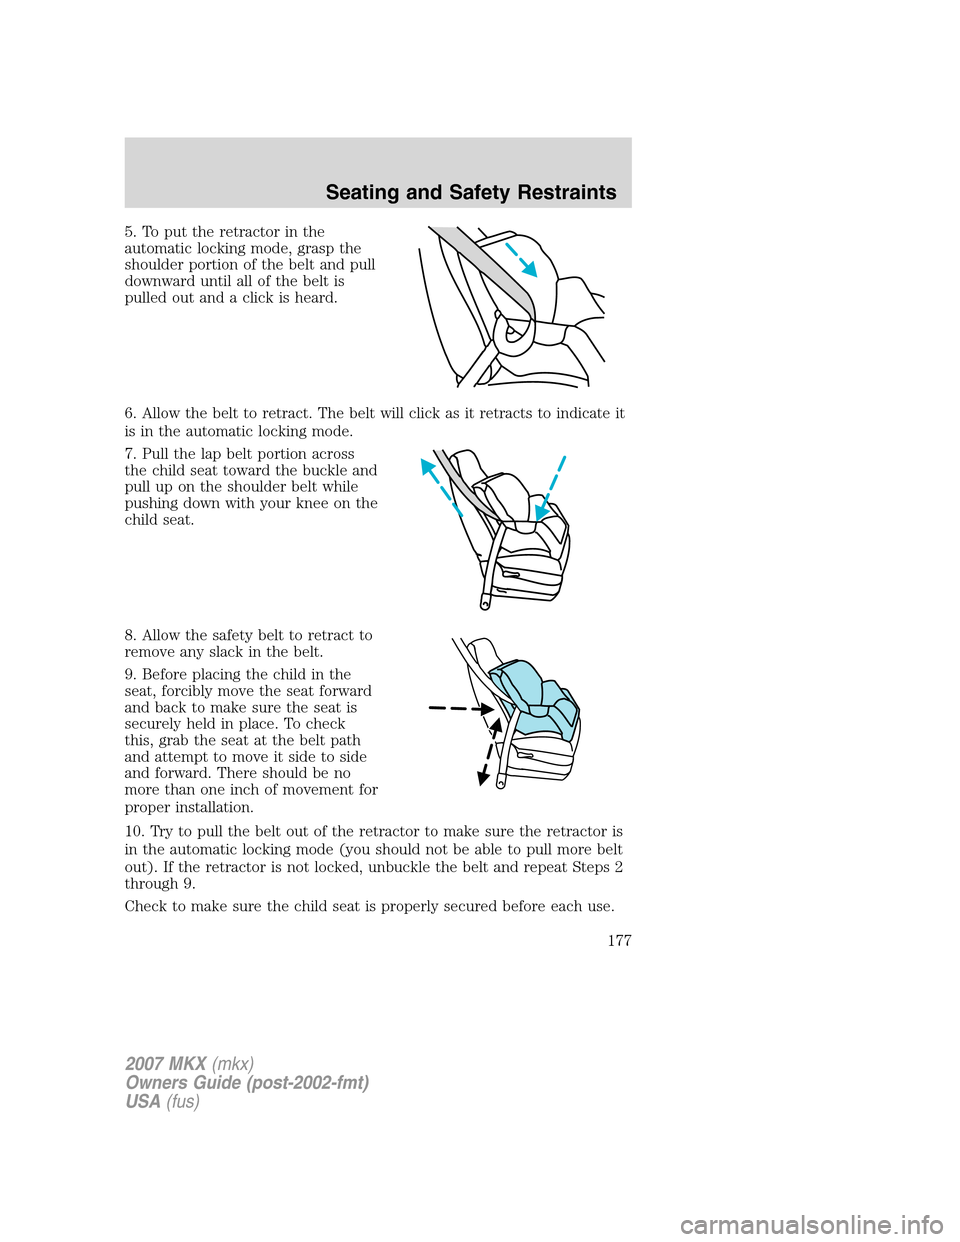 LINCOLN MKX 2007  Owners Manual 5. To put the retractor in the
automatic locking mode, grasp the
shoulder portion of the belt and pull
downward until all of the belt is
pulled out and a click is heard.
6. Allow the belt to retract. 